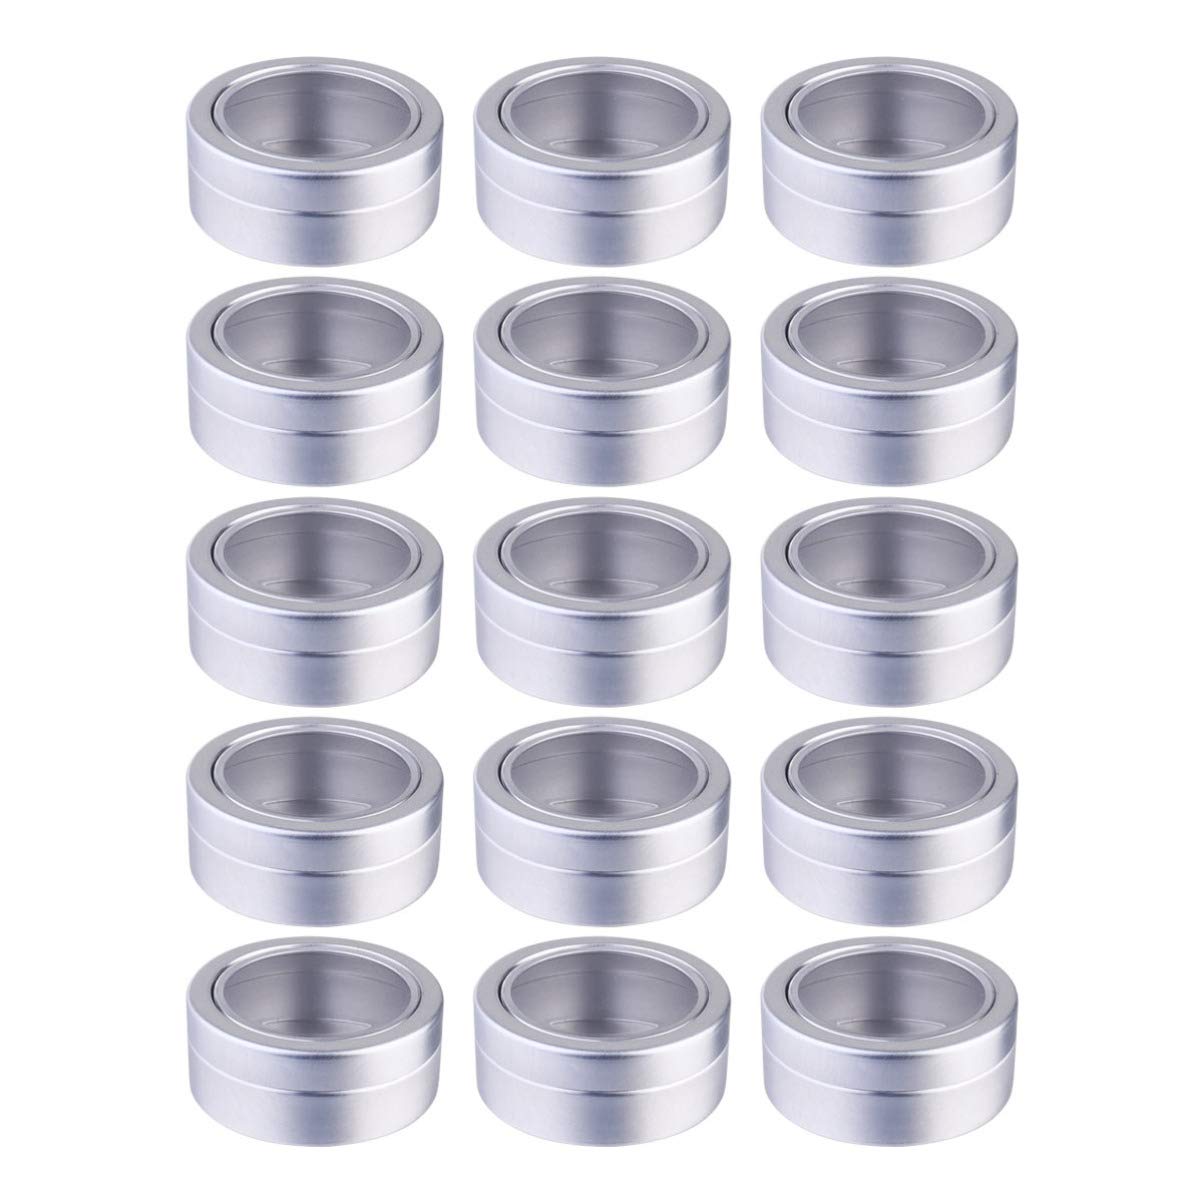 Beaupretty Aluminum Lip Balm Tin Jars with Thread Lid Travel Cosmetic Empty Slip Slide Round Containers for Spices Cosmetic Candles Gems 15pcs 25ml